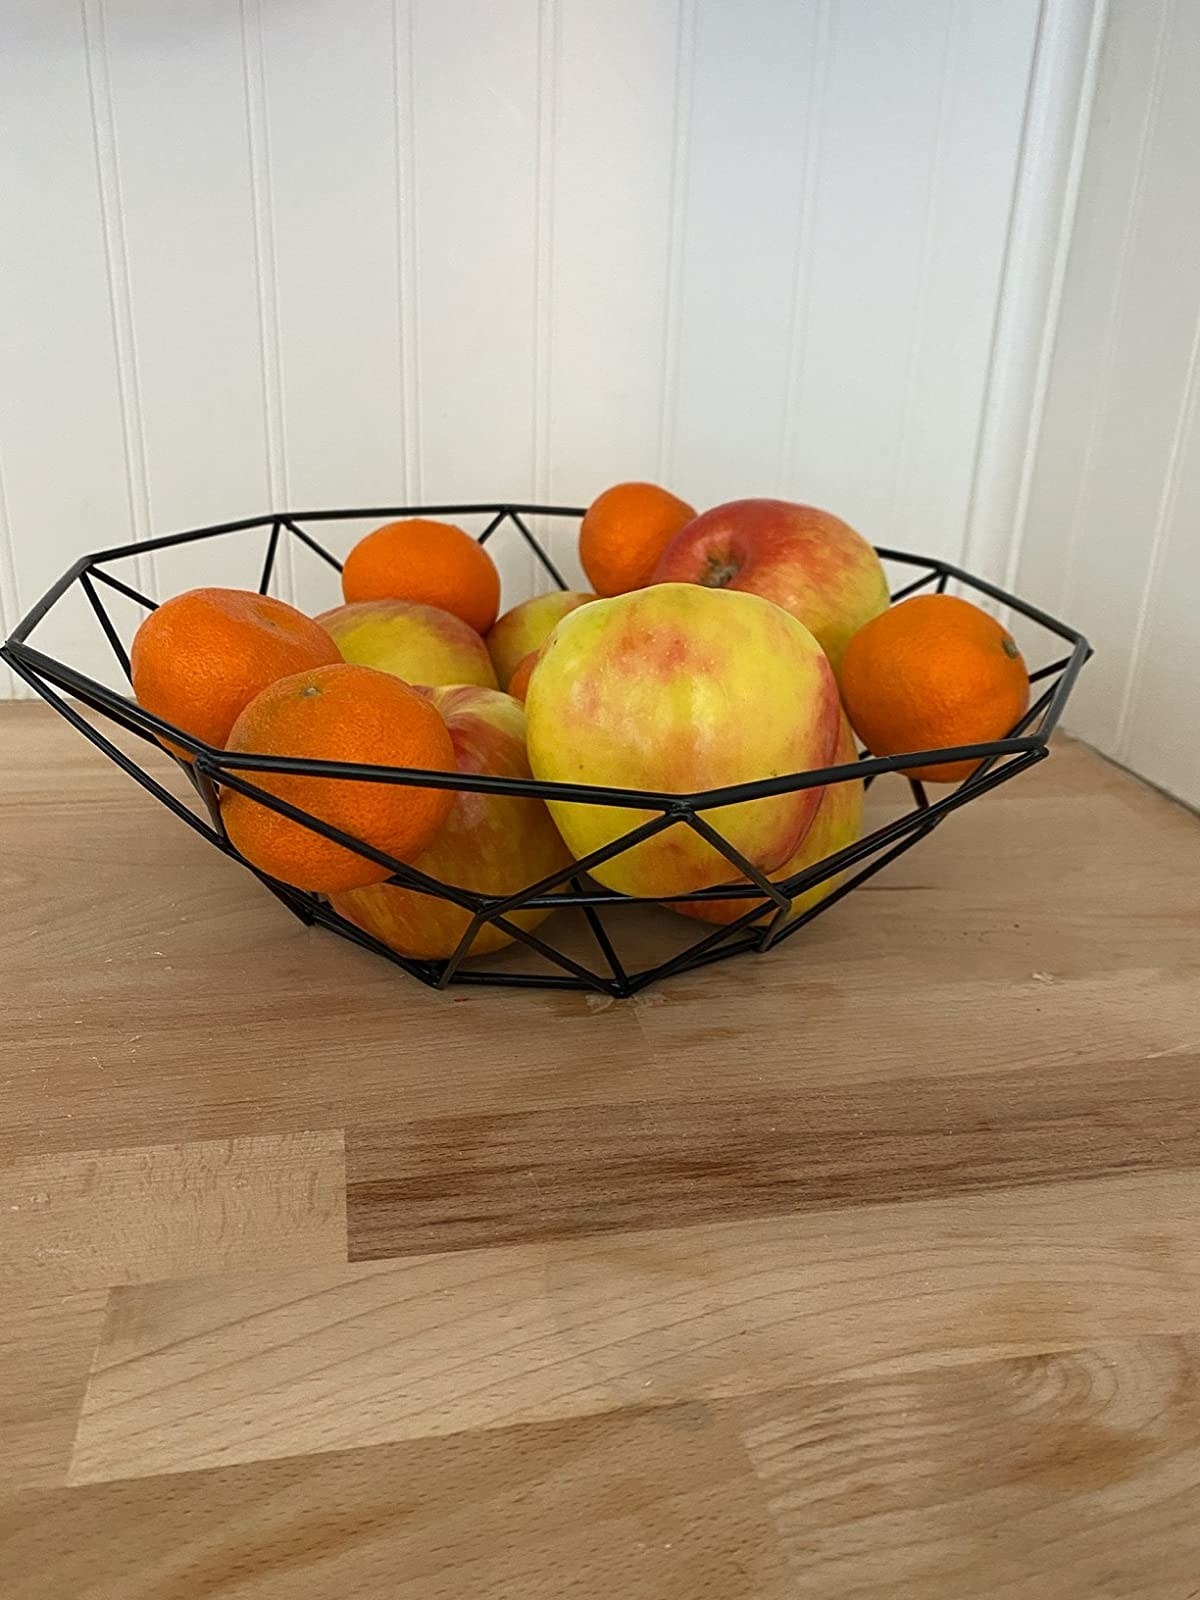 A reviewer photo of the wire bowl filled with fruit